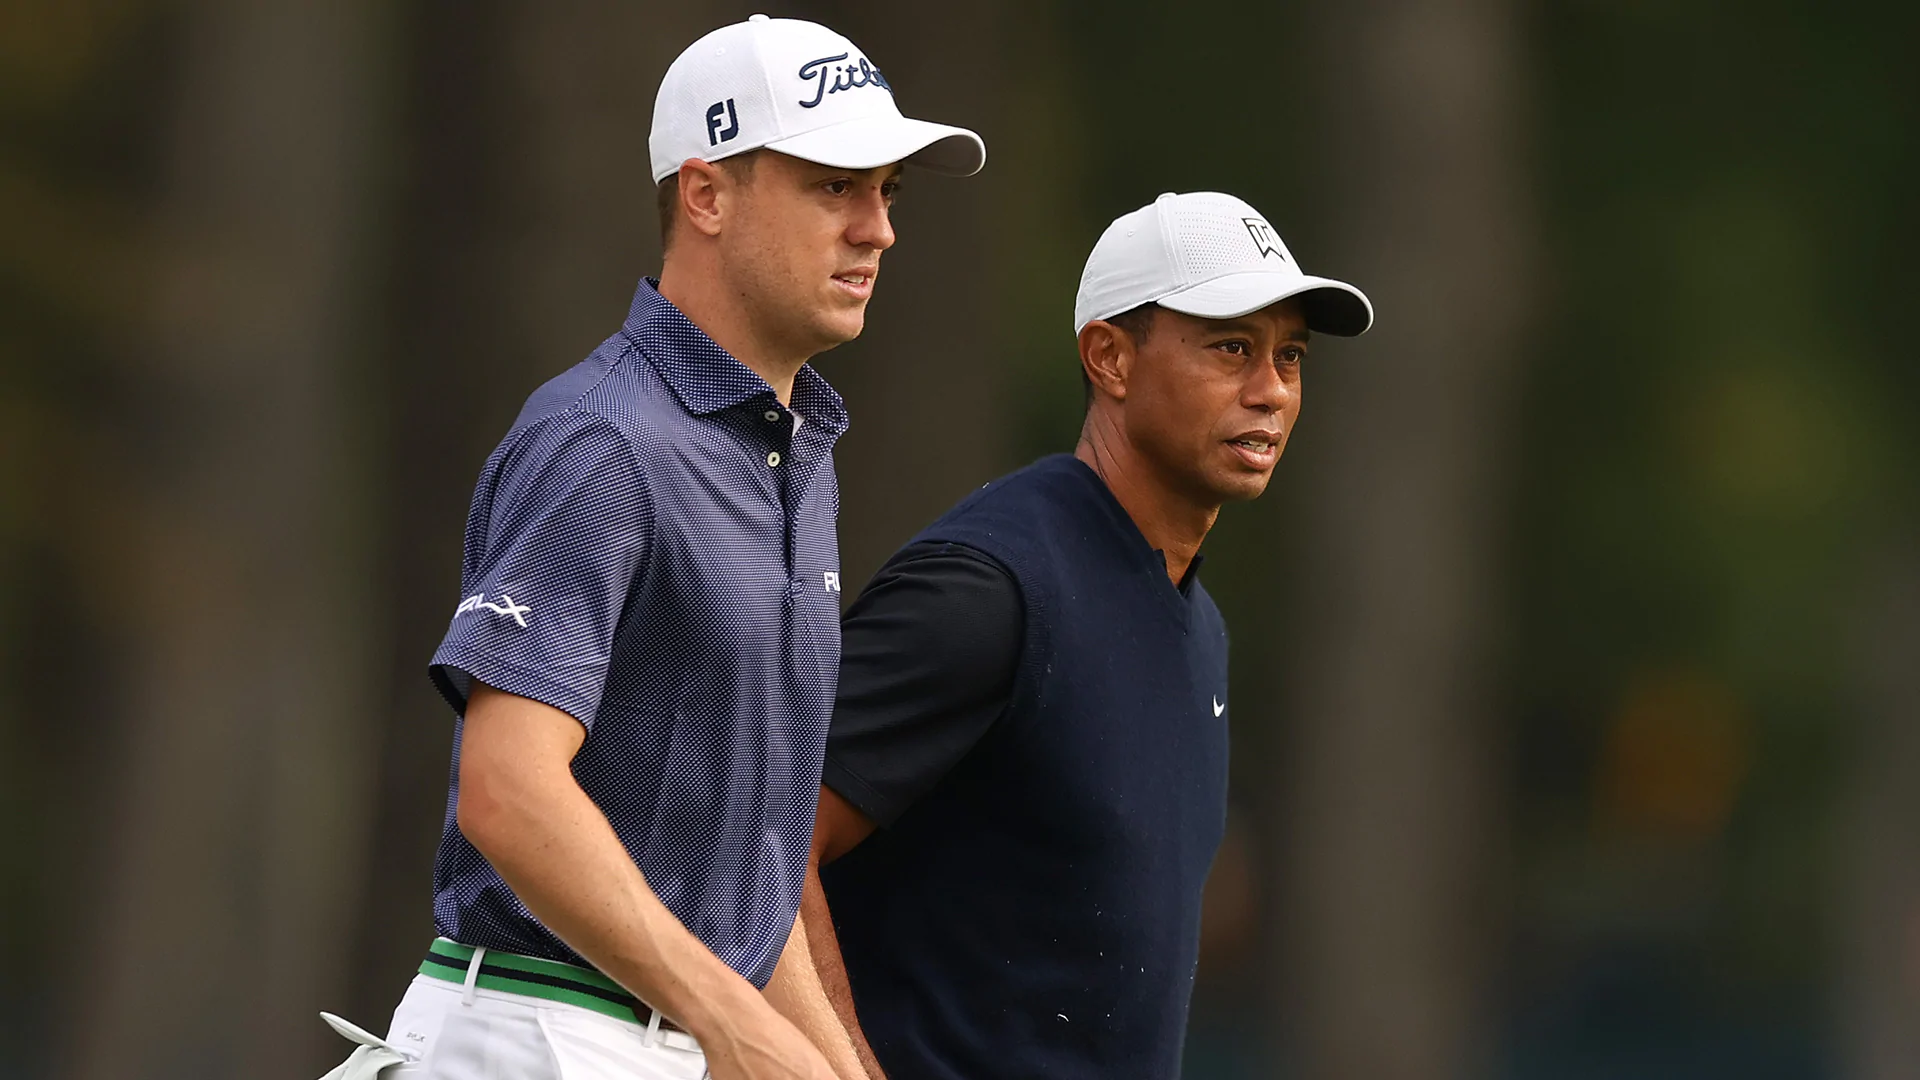 Justin Thomas 'sick to my stomach' after learning of Tiger Woods' accident 4